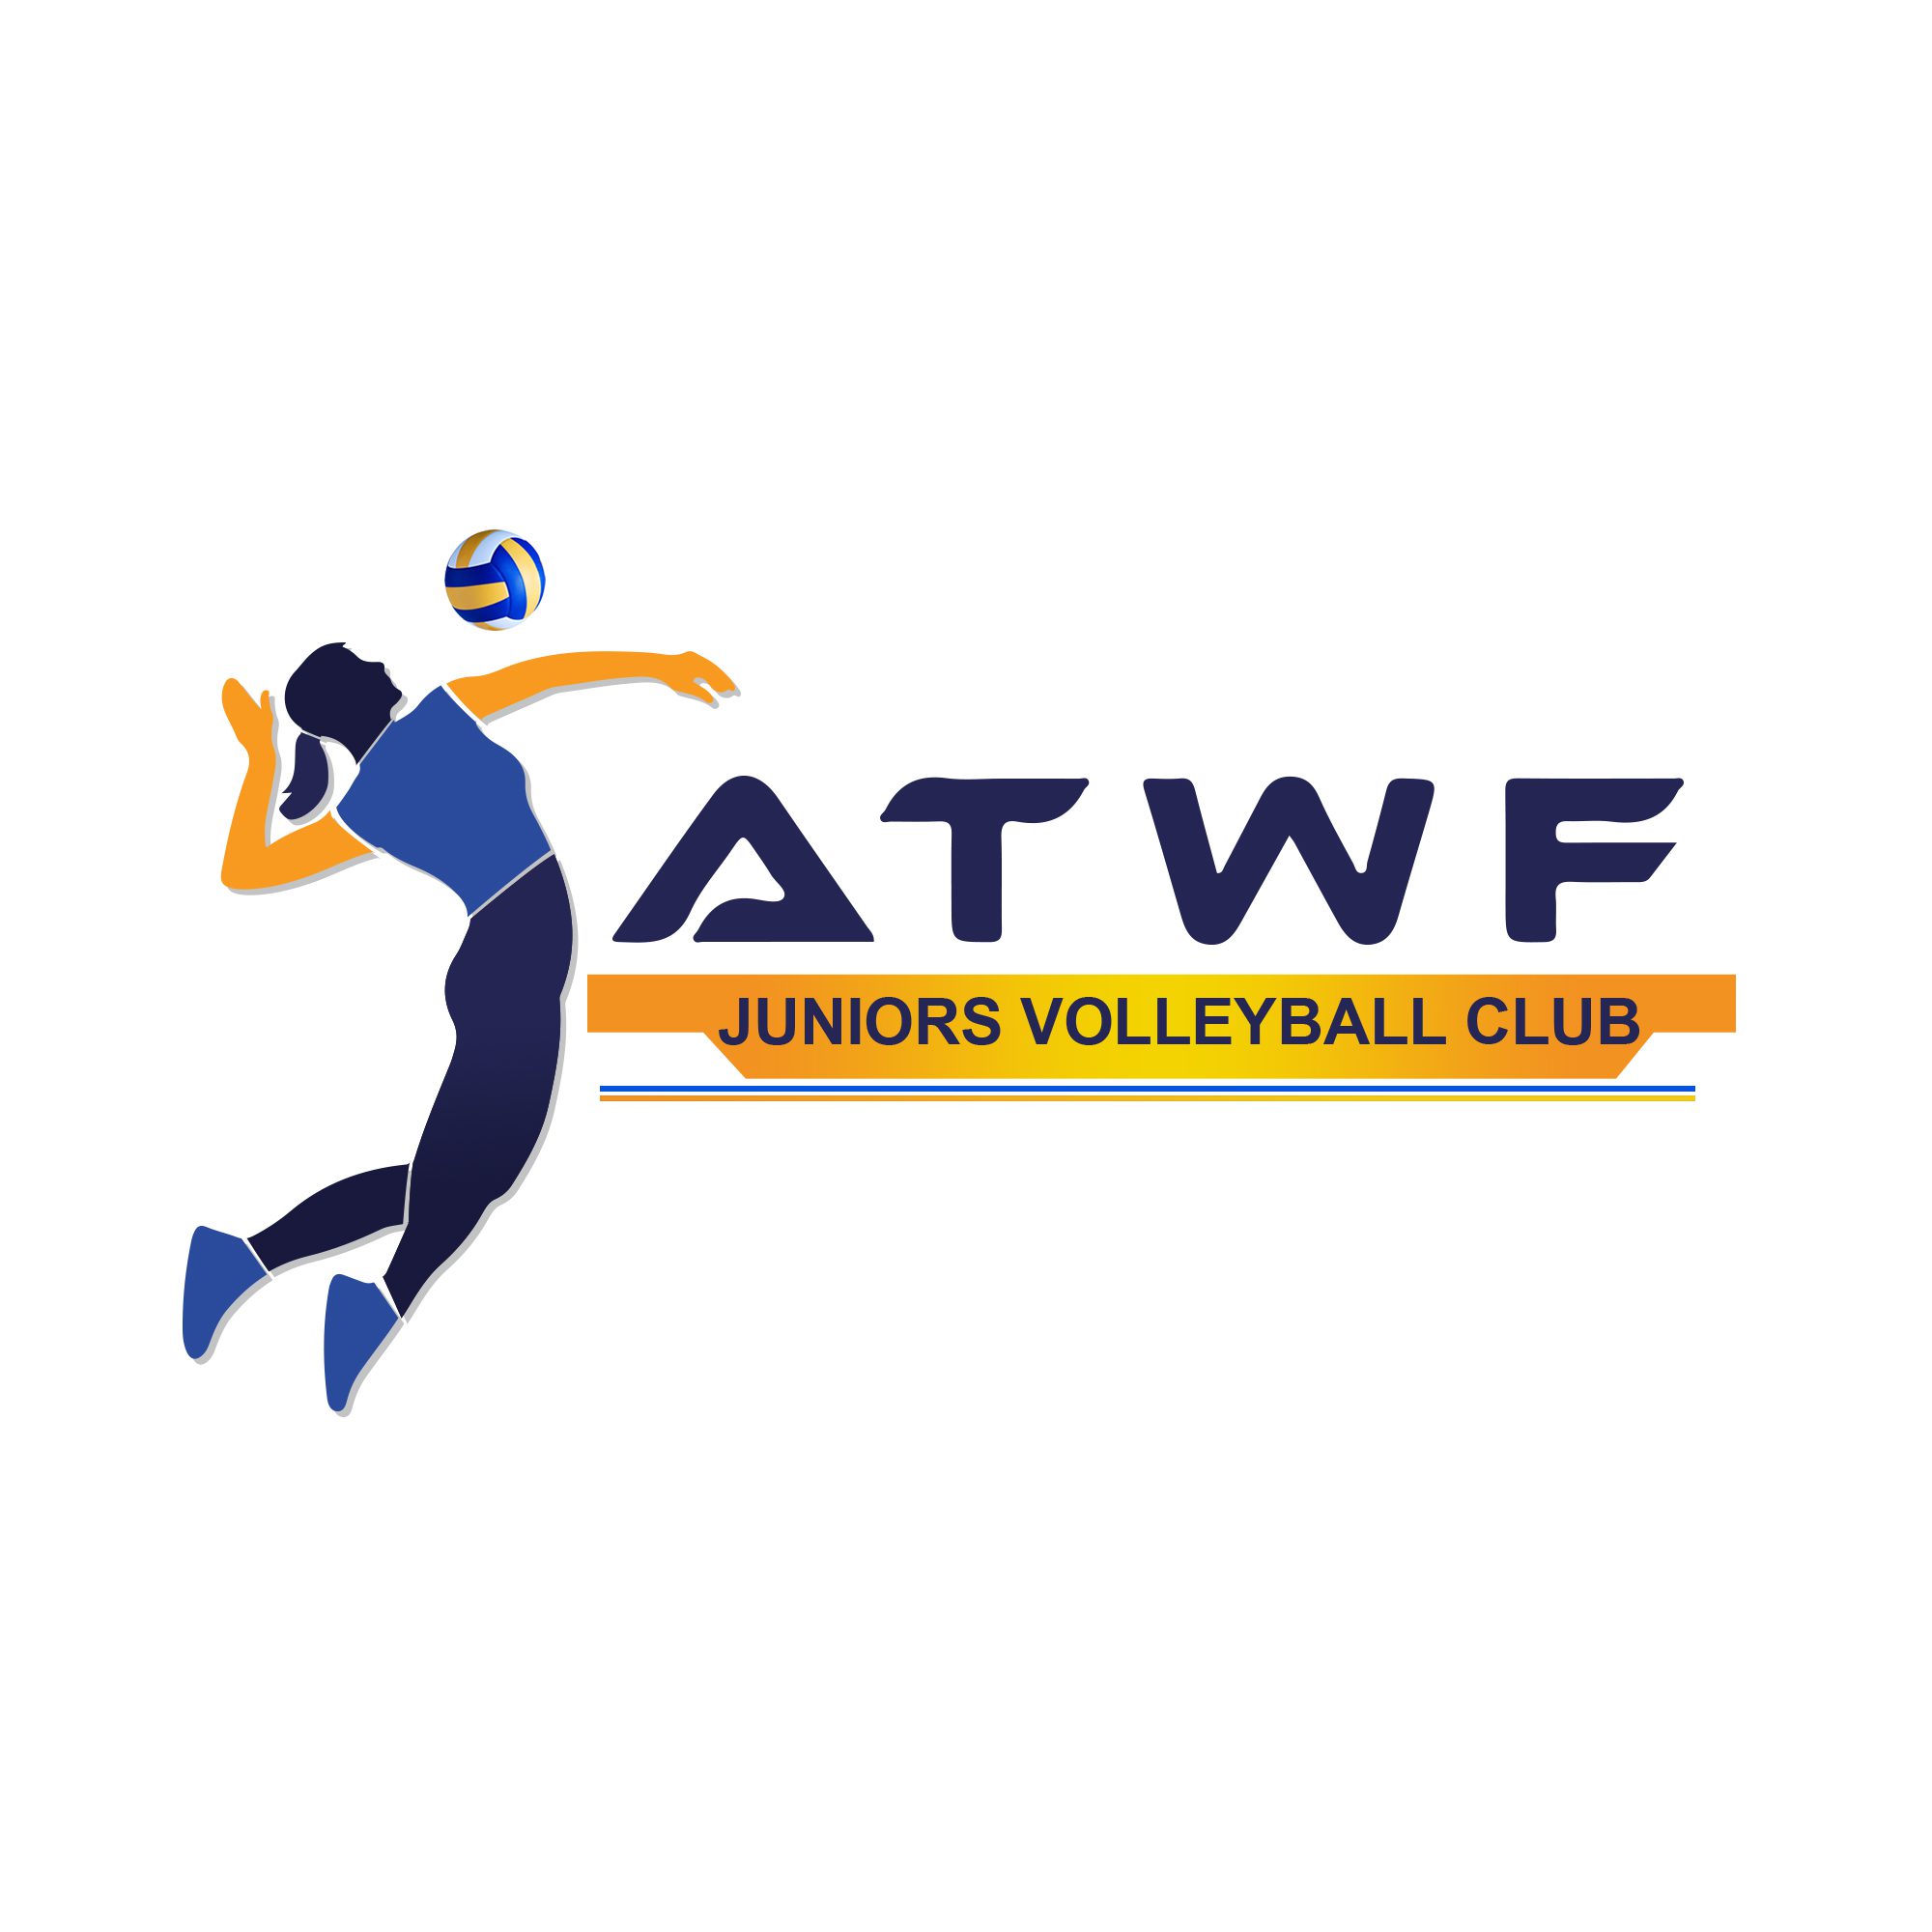 Atwf Volleyball Training, Sports, Central Texas, Killeen, youth sports, volleyball, coach